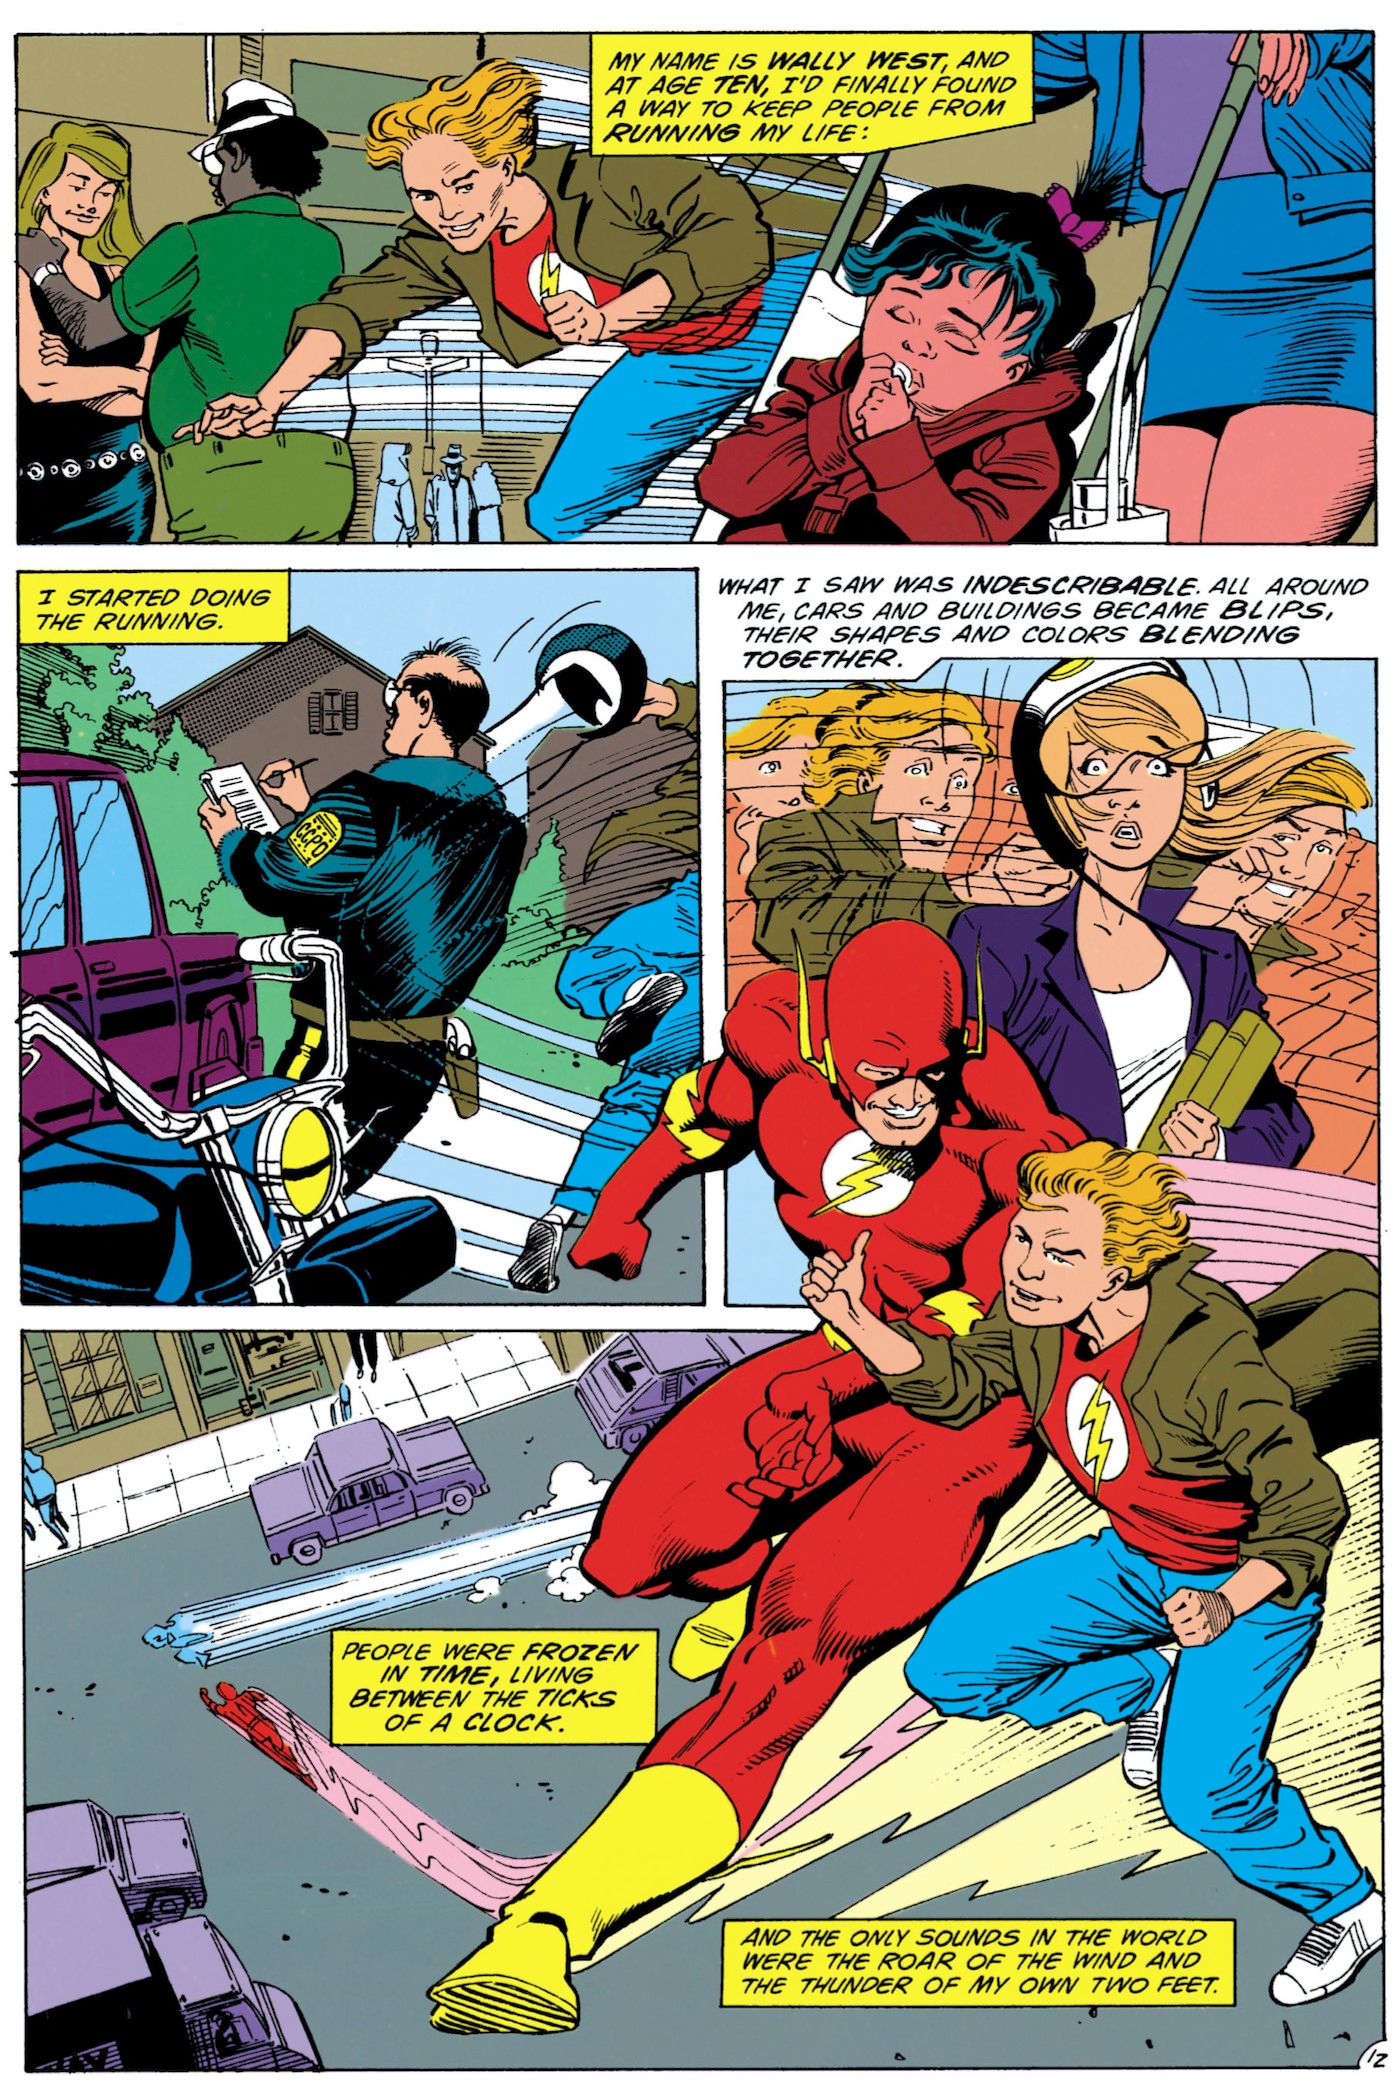 Wally West Steals Hat